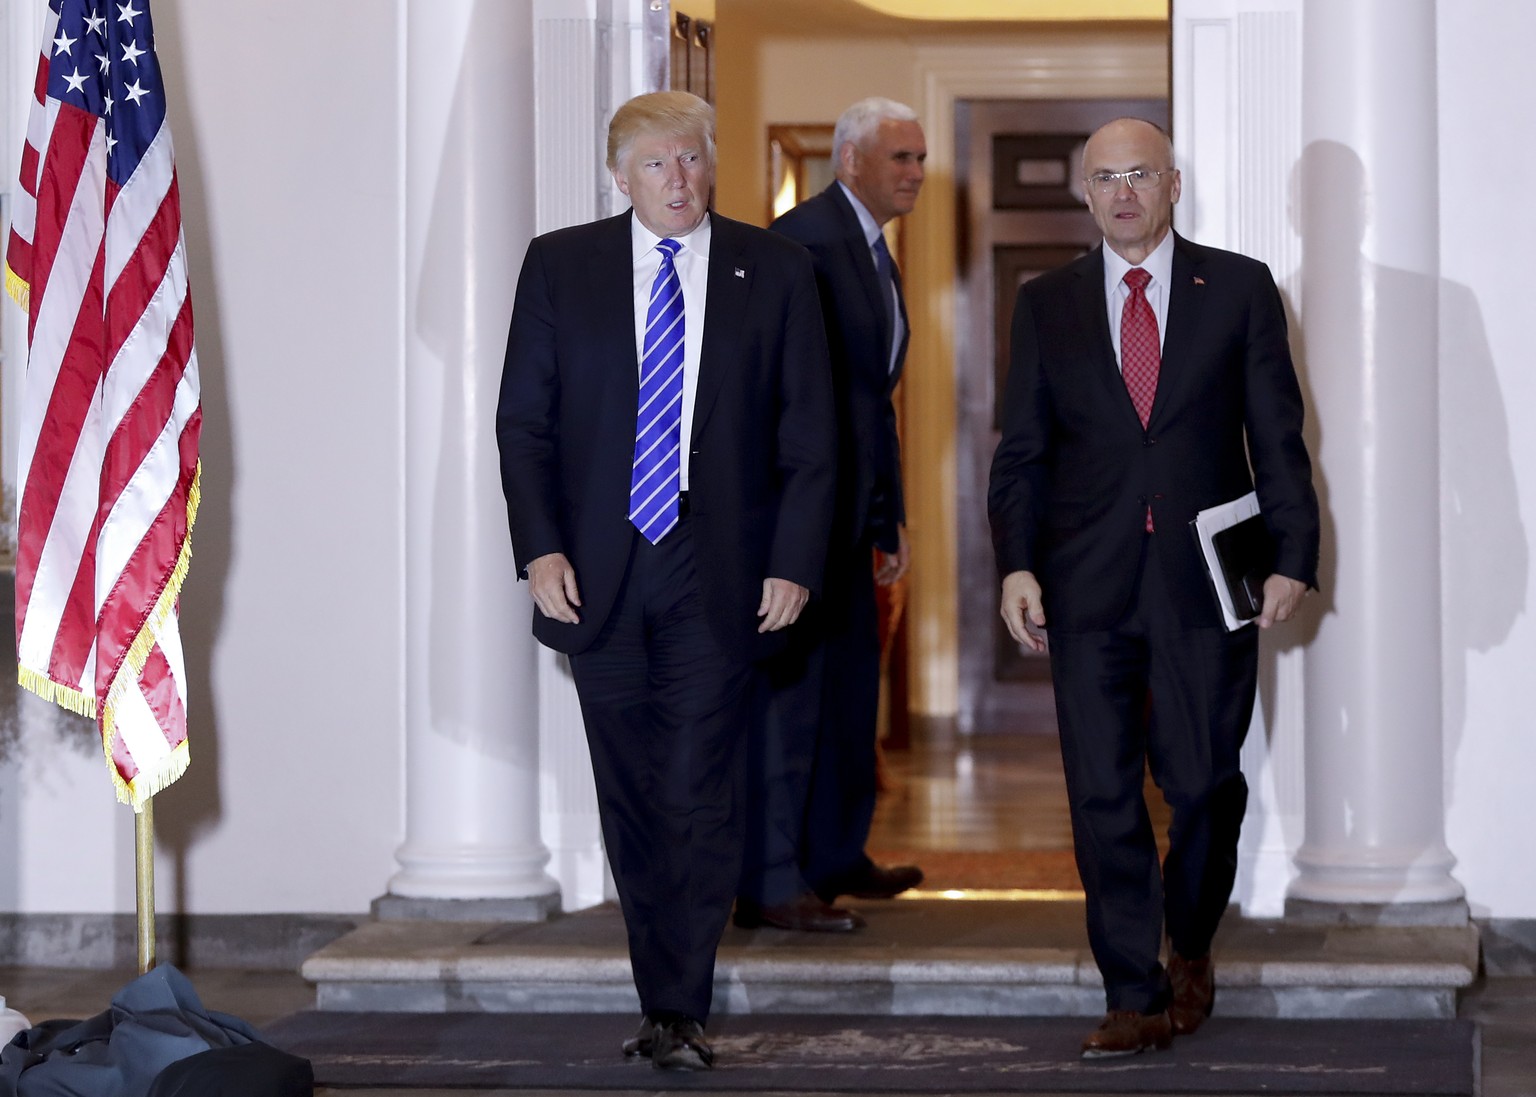 FILE - In this Nov. 19, 2016 file photo, President-elect Donald Trump walks with CKE Restaurants CEO Andy Puzder from Trump National Golf Club Bedminster clubhouse in Bedminster, N.J. Trump is expecte ...